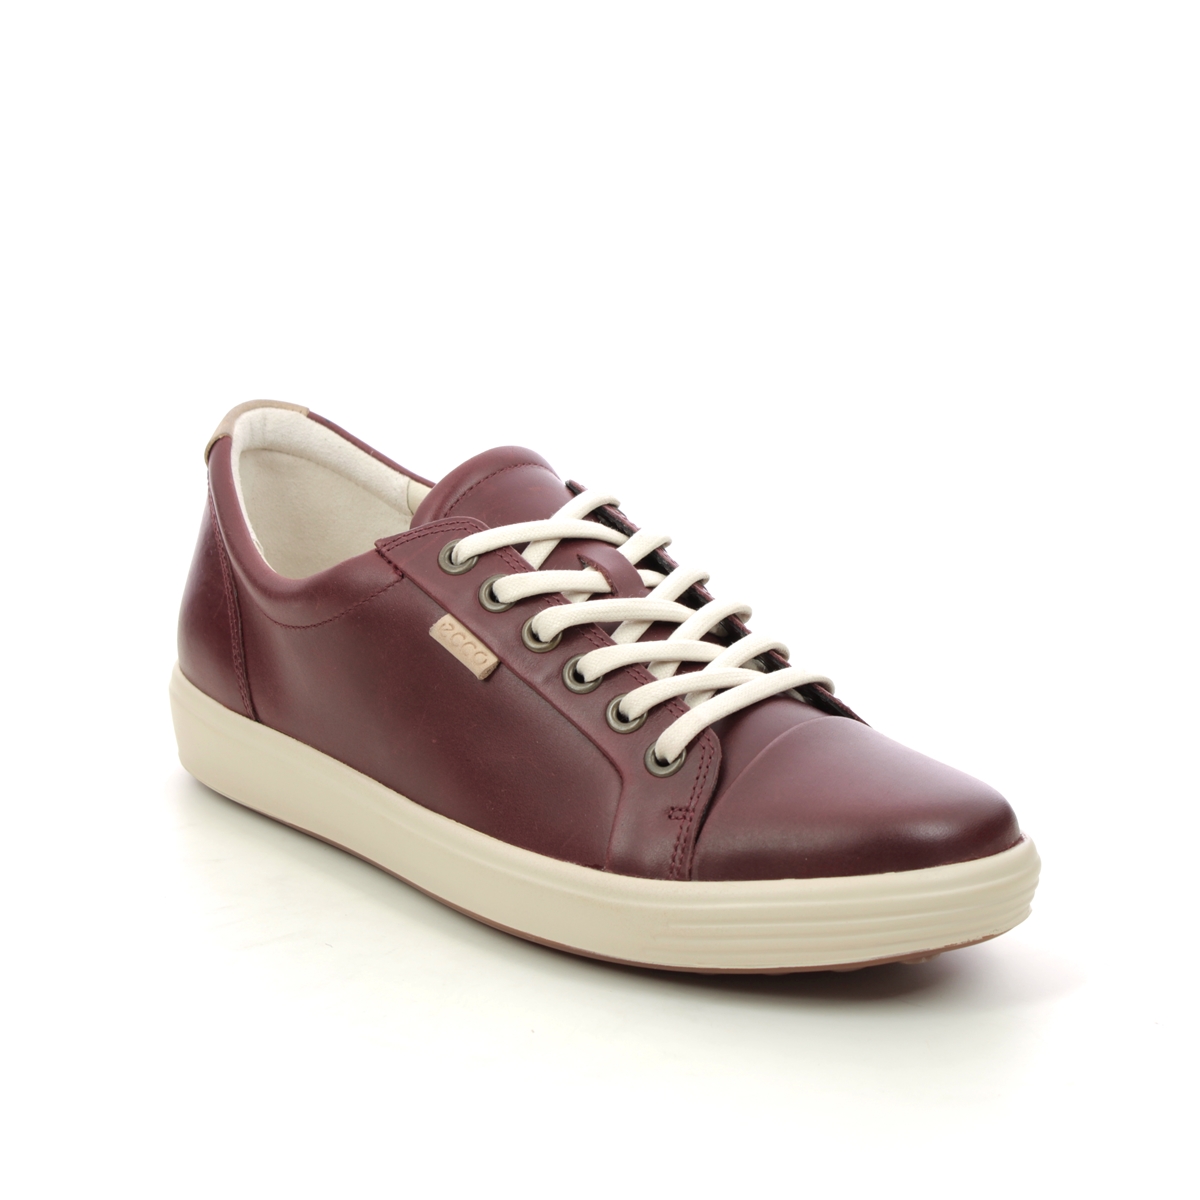 Ecco Soft 7 Lace Plum Womens Trainers 430003-01588 In Size 38 In Plain Plum